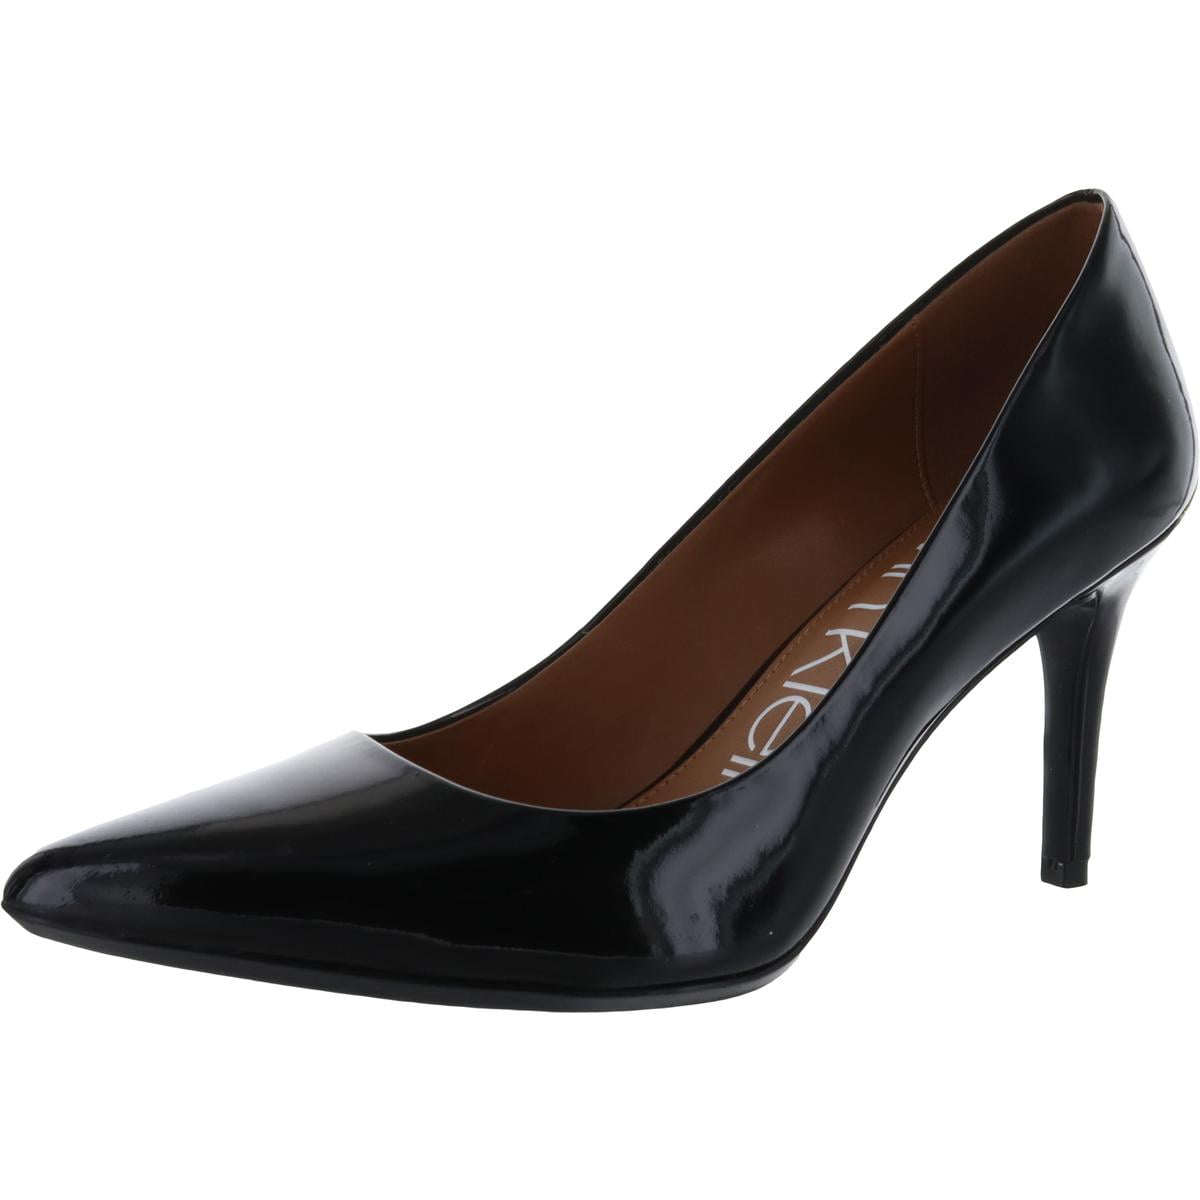 Brian Atwood Valerie Pump Black Patent Leather Pointed Single Sole  Dress Pumps 